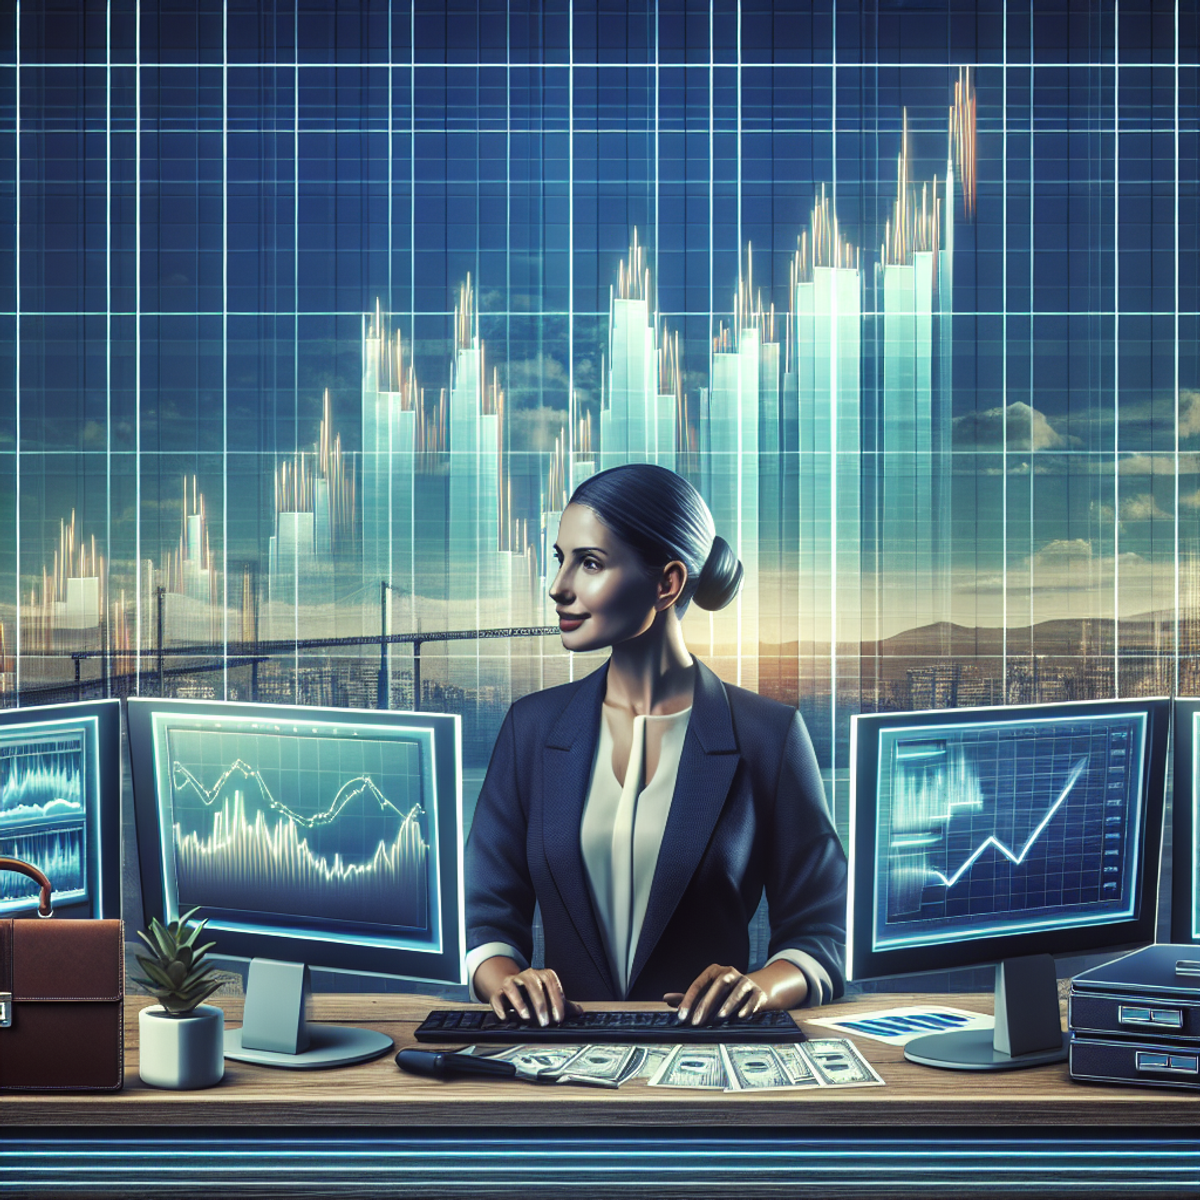 A serene Hispanic female trader sits confidently at her station, surrounded by multiple computer screens displaying rising graphs. A full briefcase nearby hints at wealth, with a peaceful cityscape in the background indicating stability.